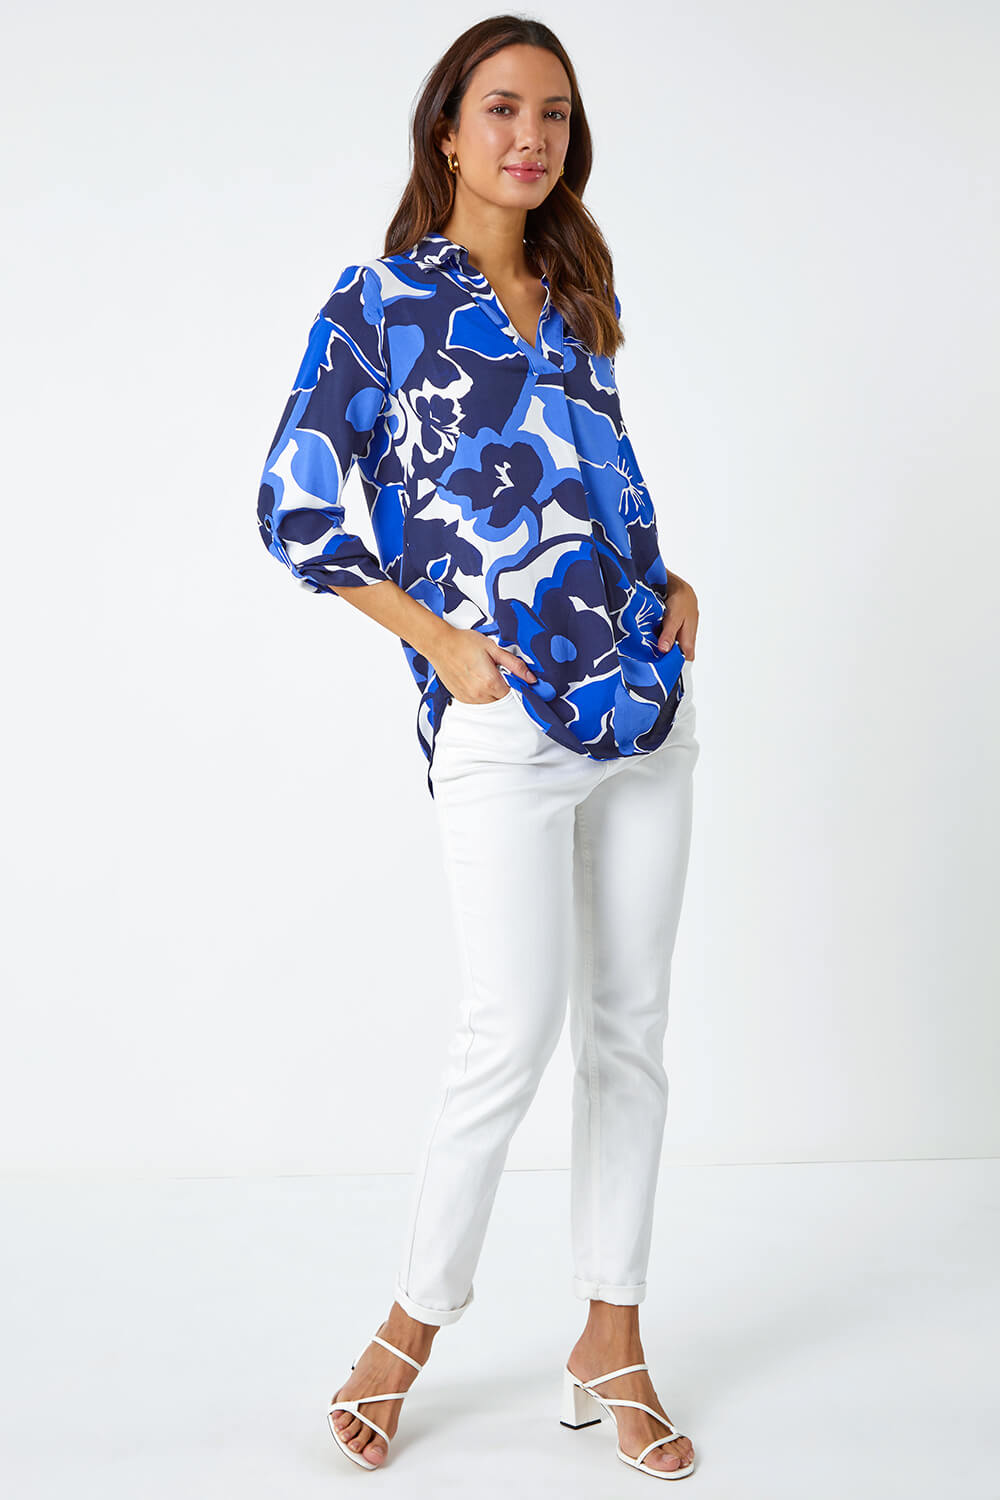 Royal Blue Floral Print Pleat Front Top, Image 3 of 6